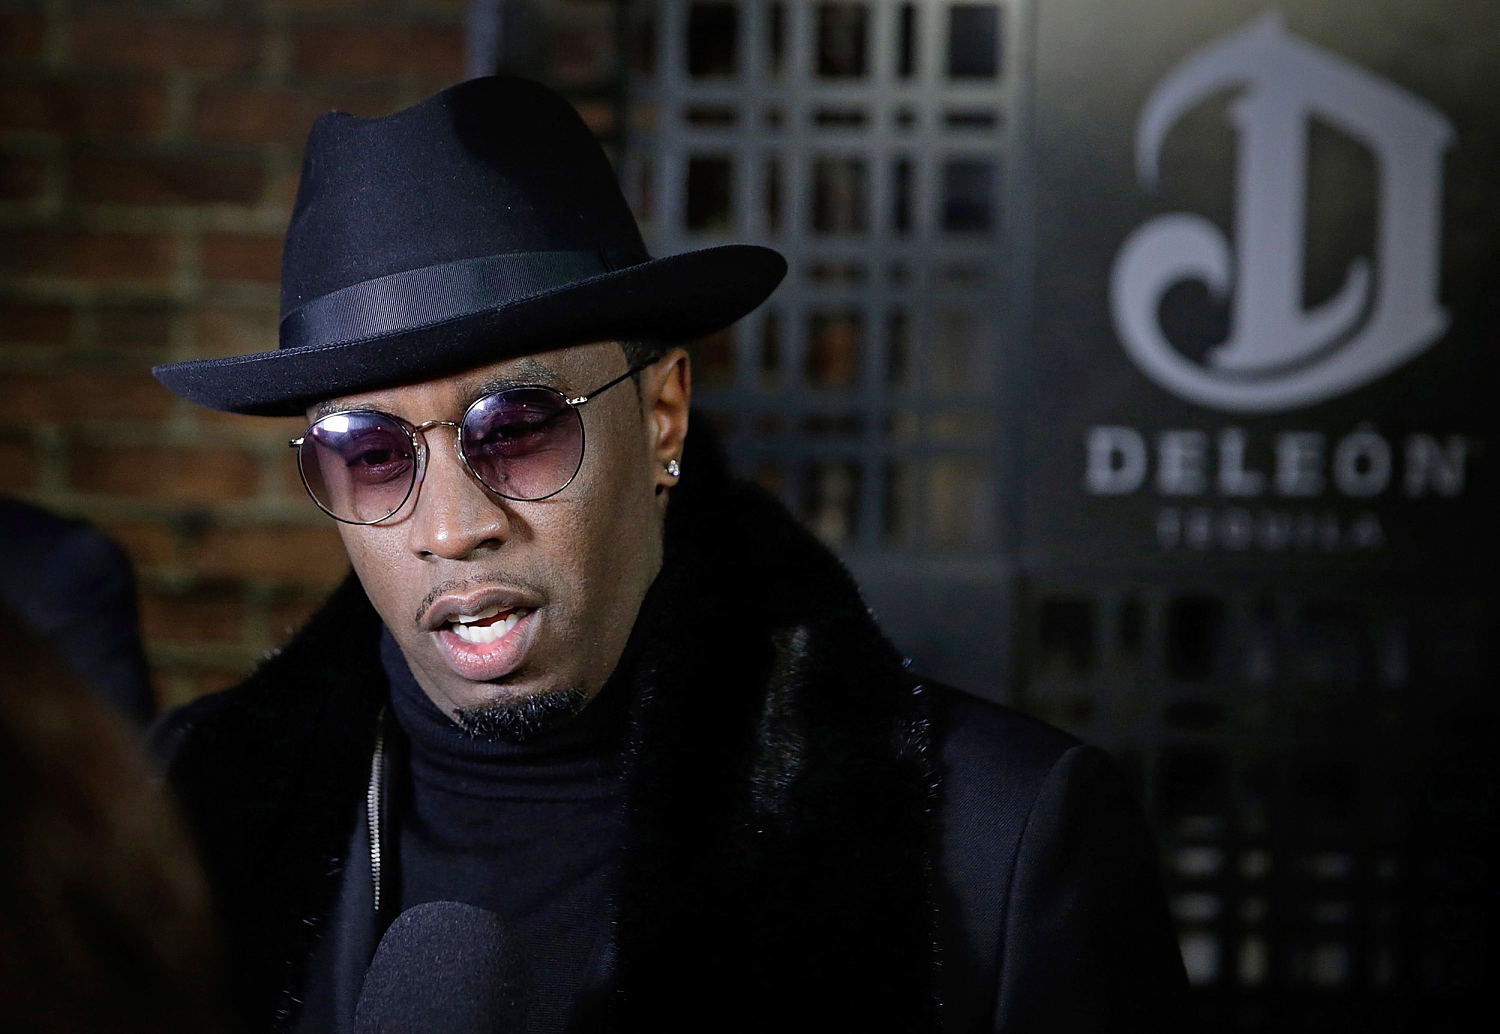 Diageo cites Diddy rape claims in renewed push to keep him out of tequila ads